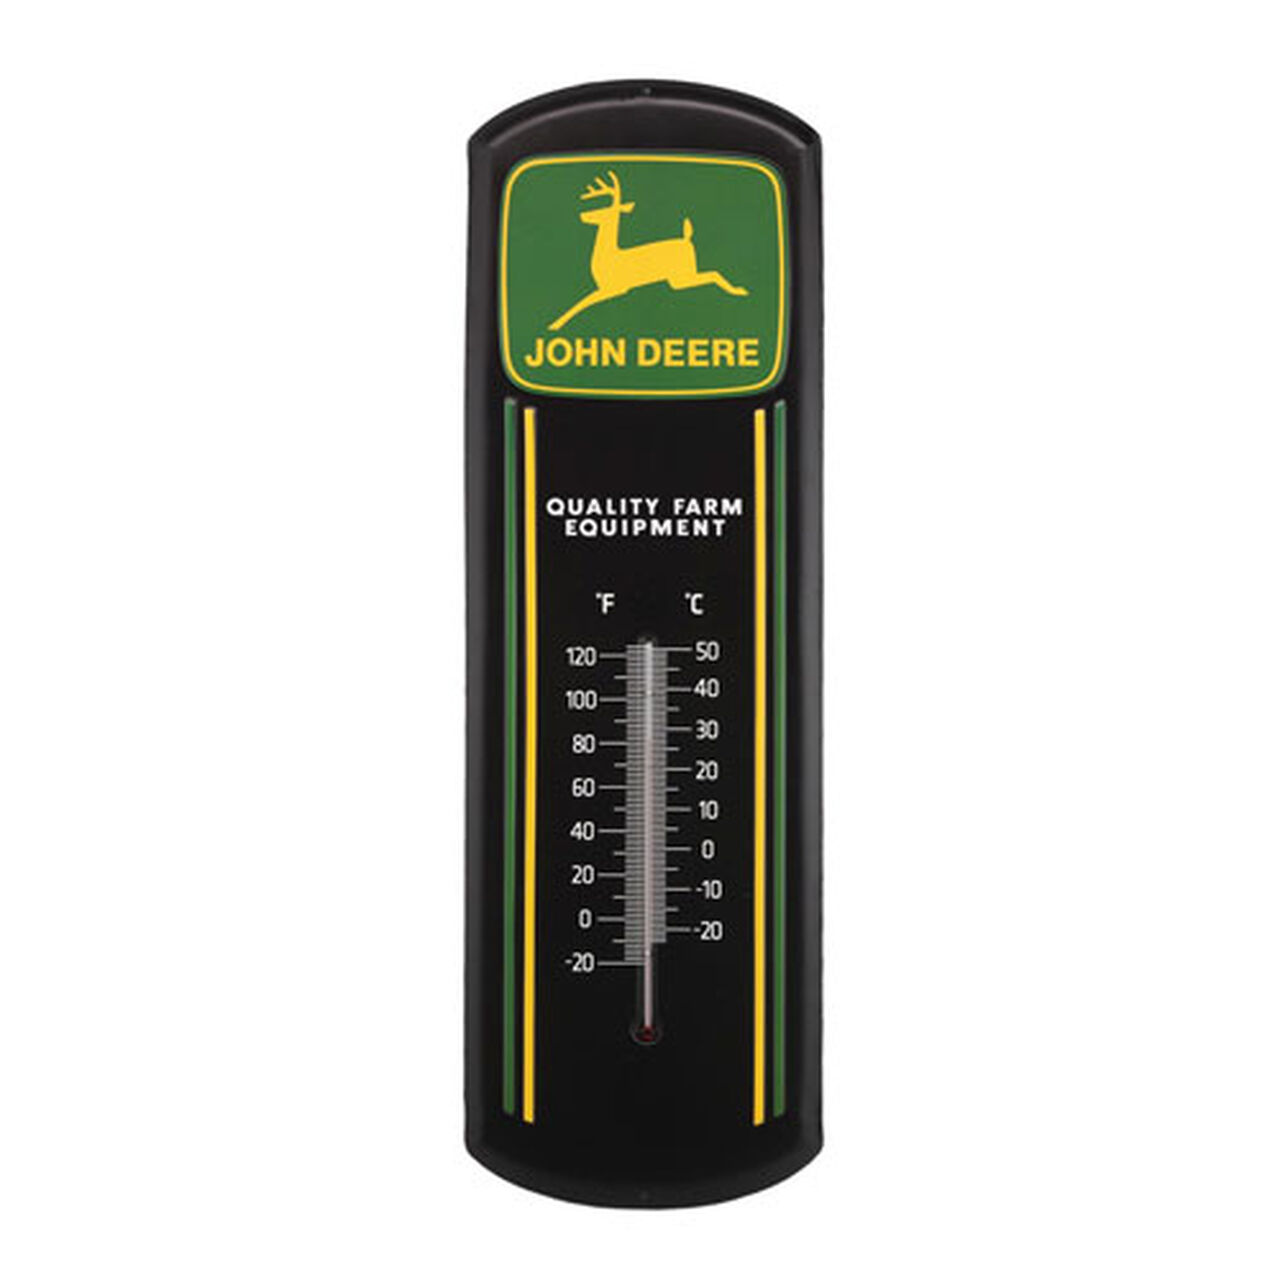 John Deere Quality Farm Equipment Outdoor Thermometer - LP71673,  image number 1